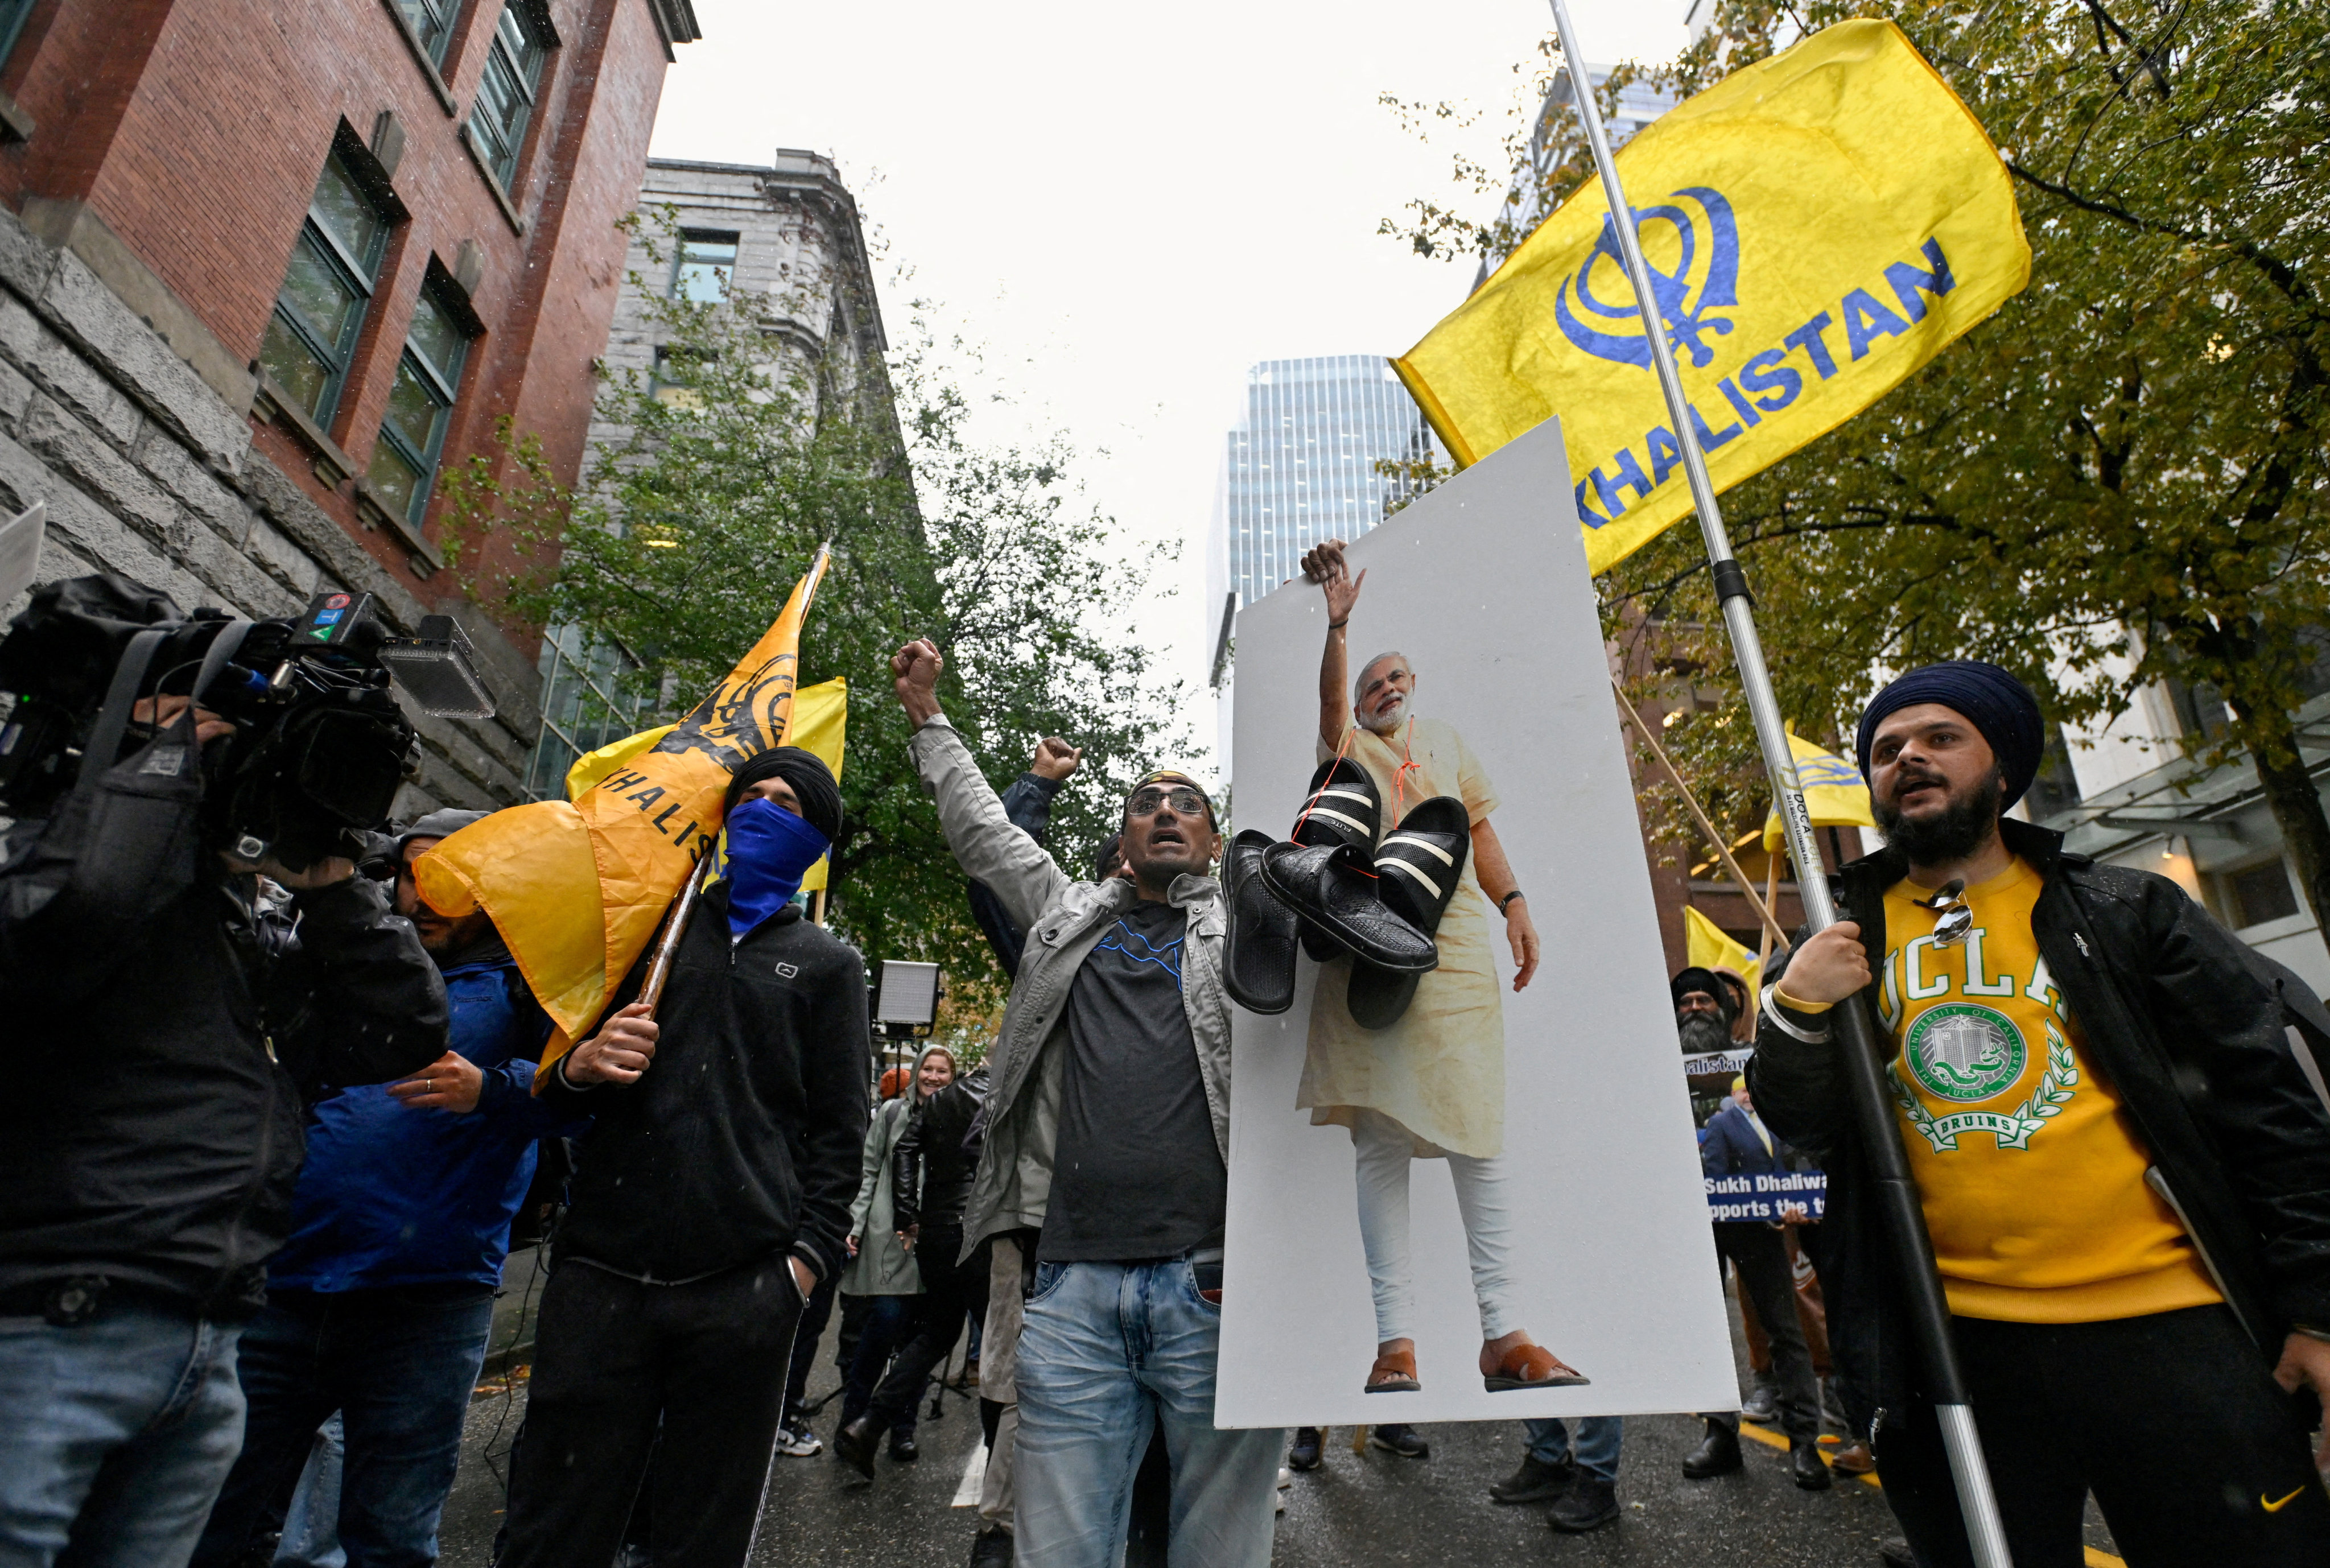 Demonstrators holding flags and signs protest outside India’s consulate in Vancouver, Canada in September. Photo: Reuters